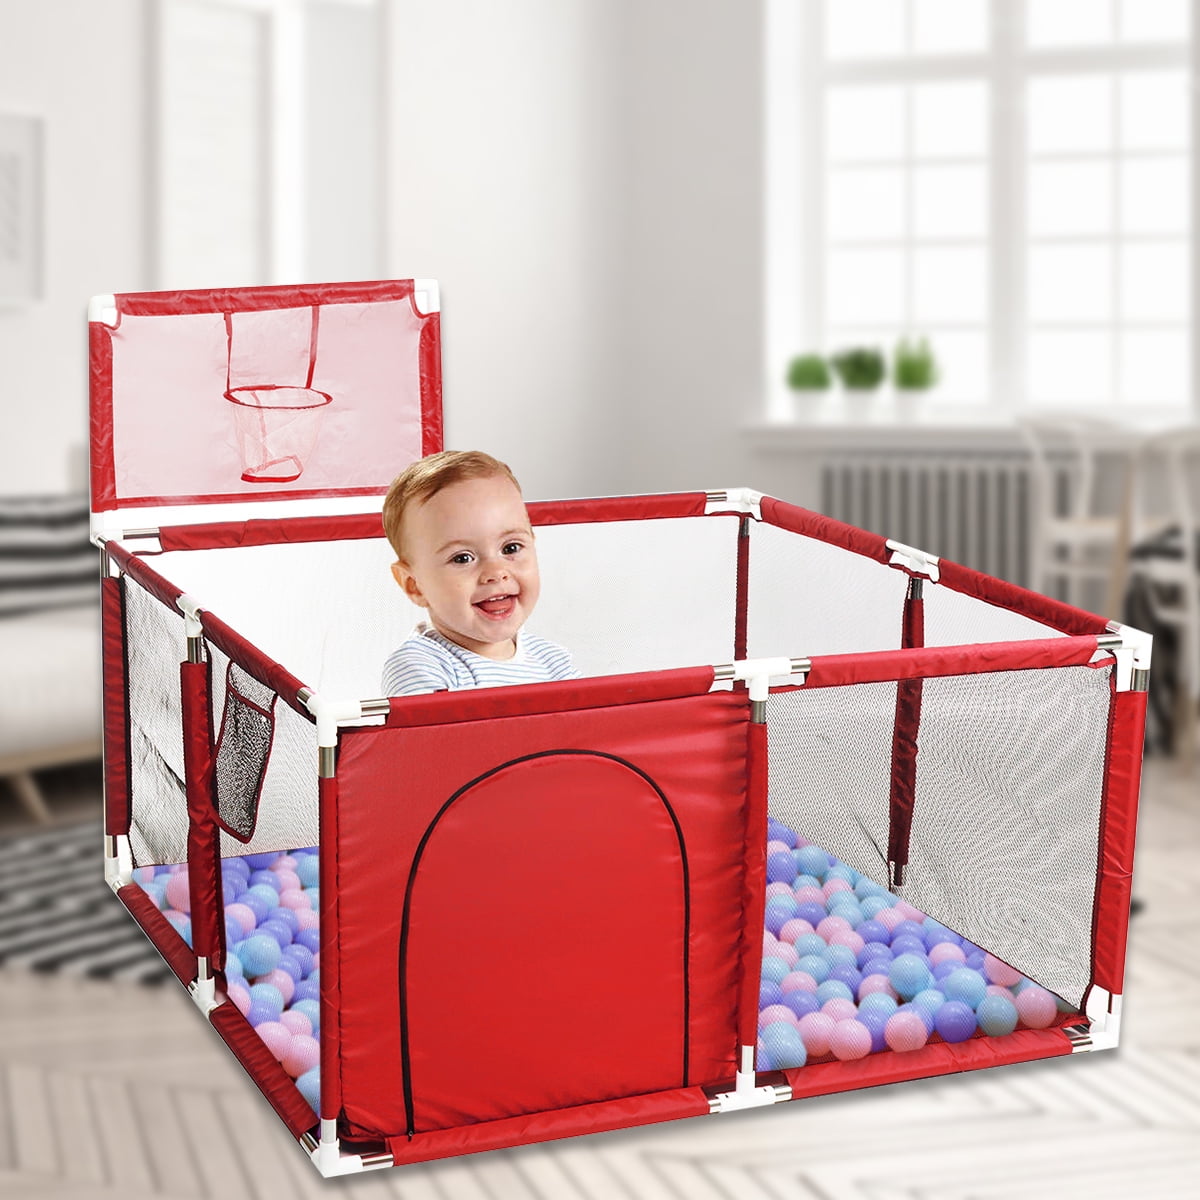 Portable Baby Playpen, Extra Large Play Yard for Infants, Sturdy 